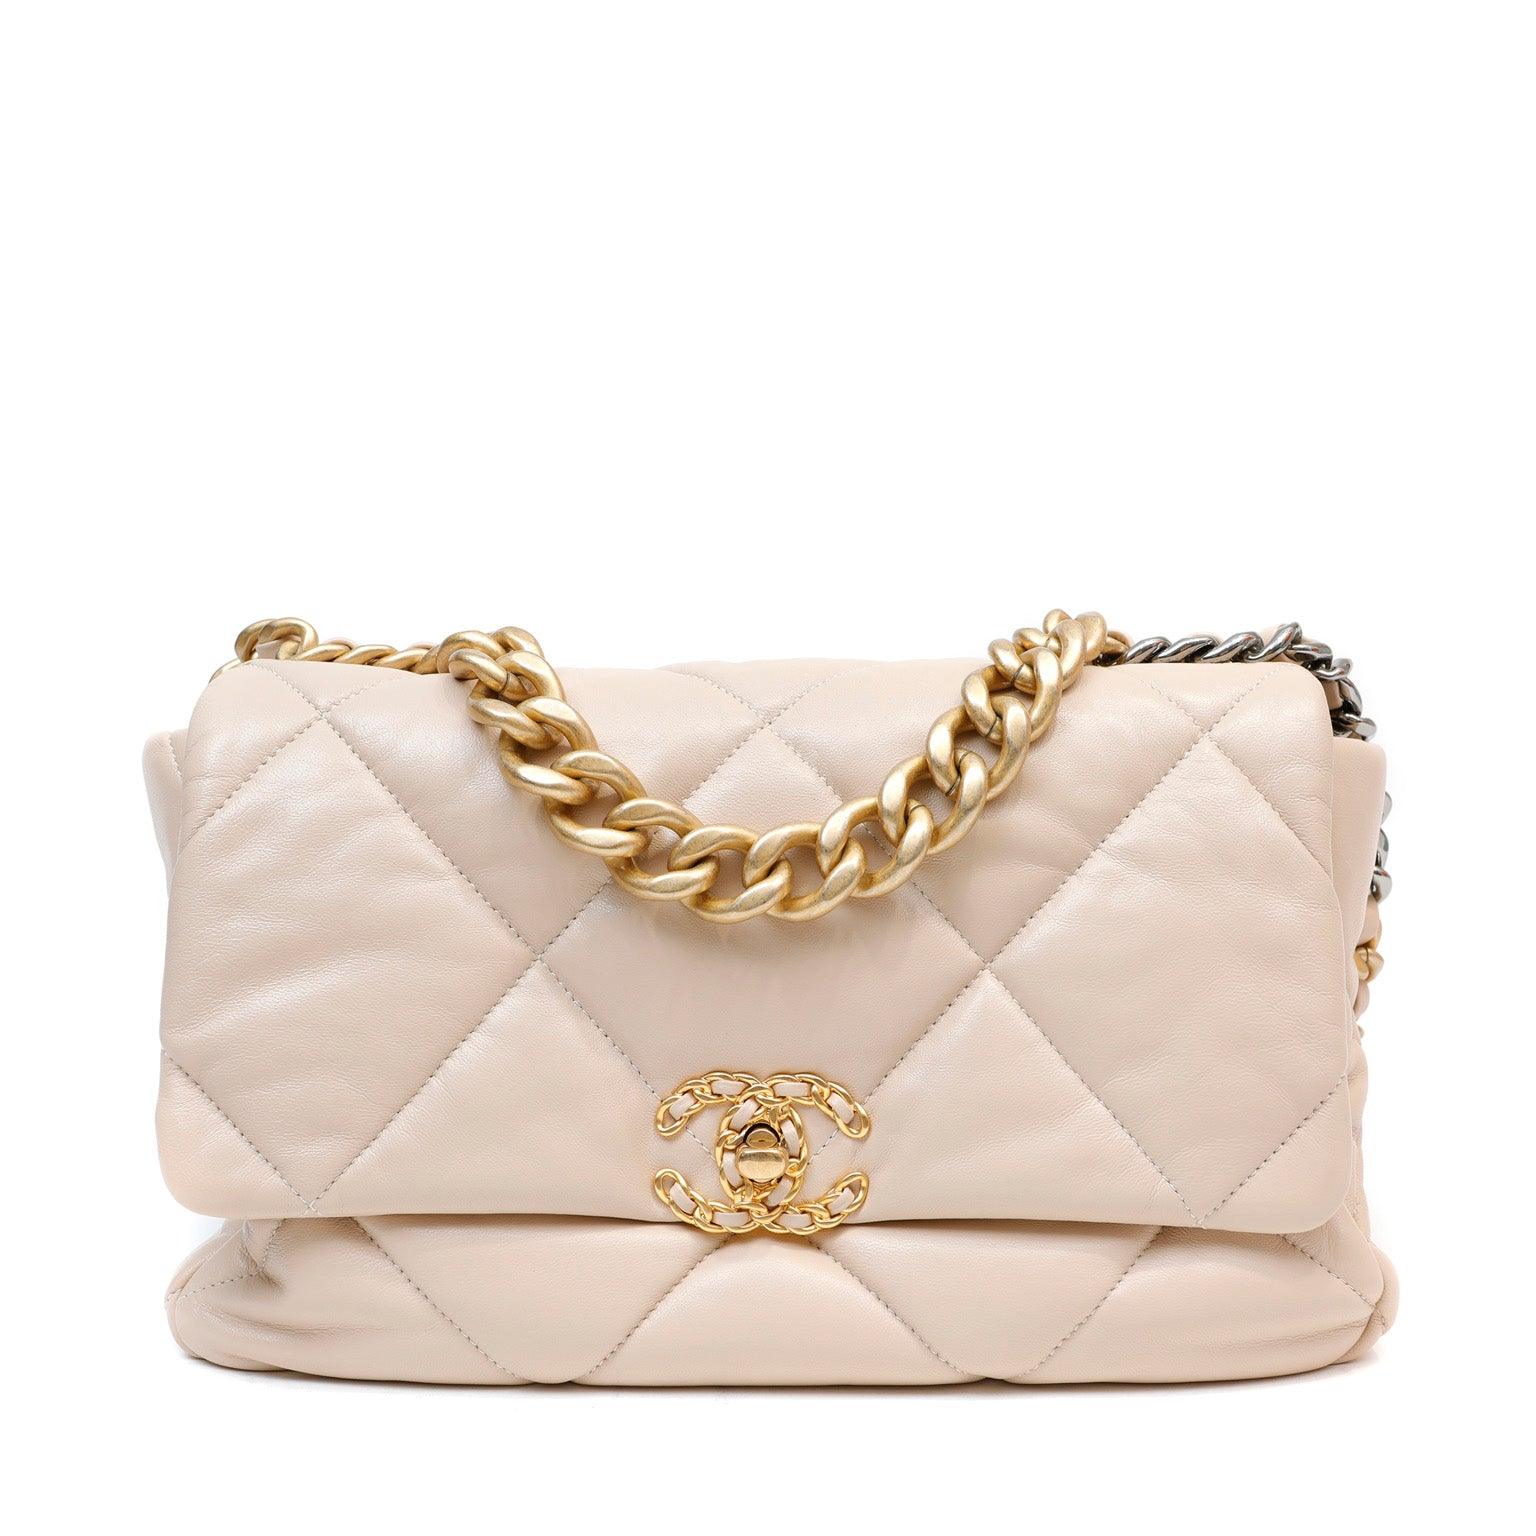 Chanel 19 Small Ivory Beige Mixed Hardware – Coco Approved Studio